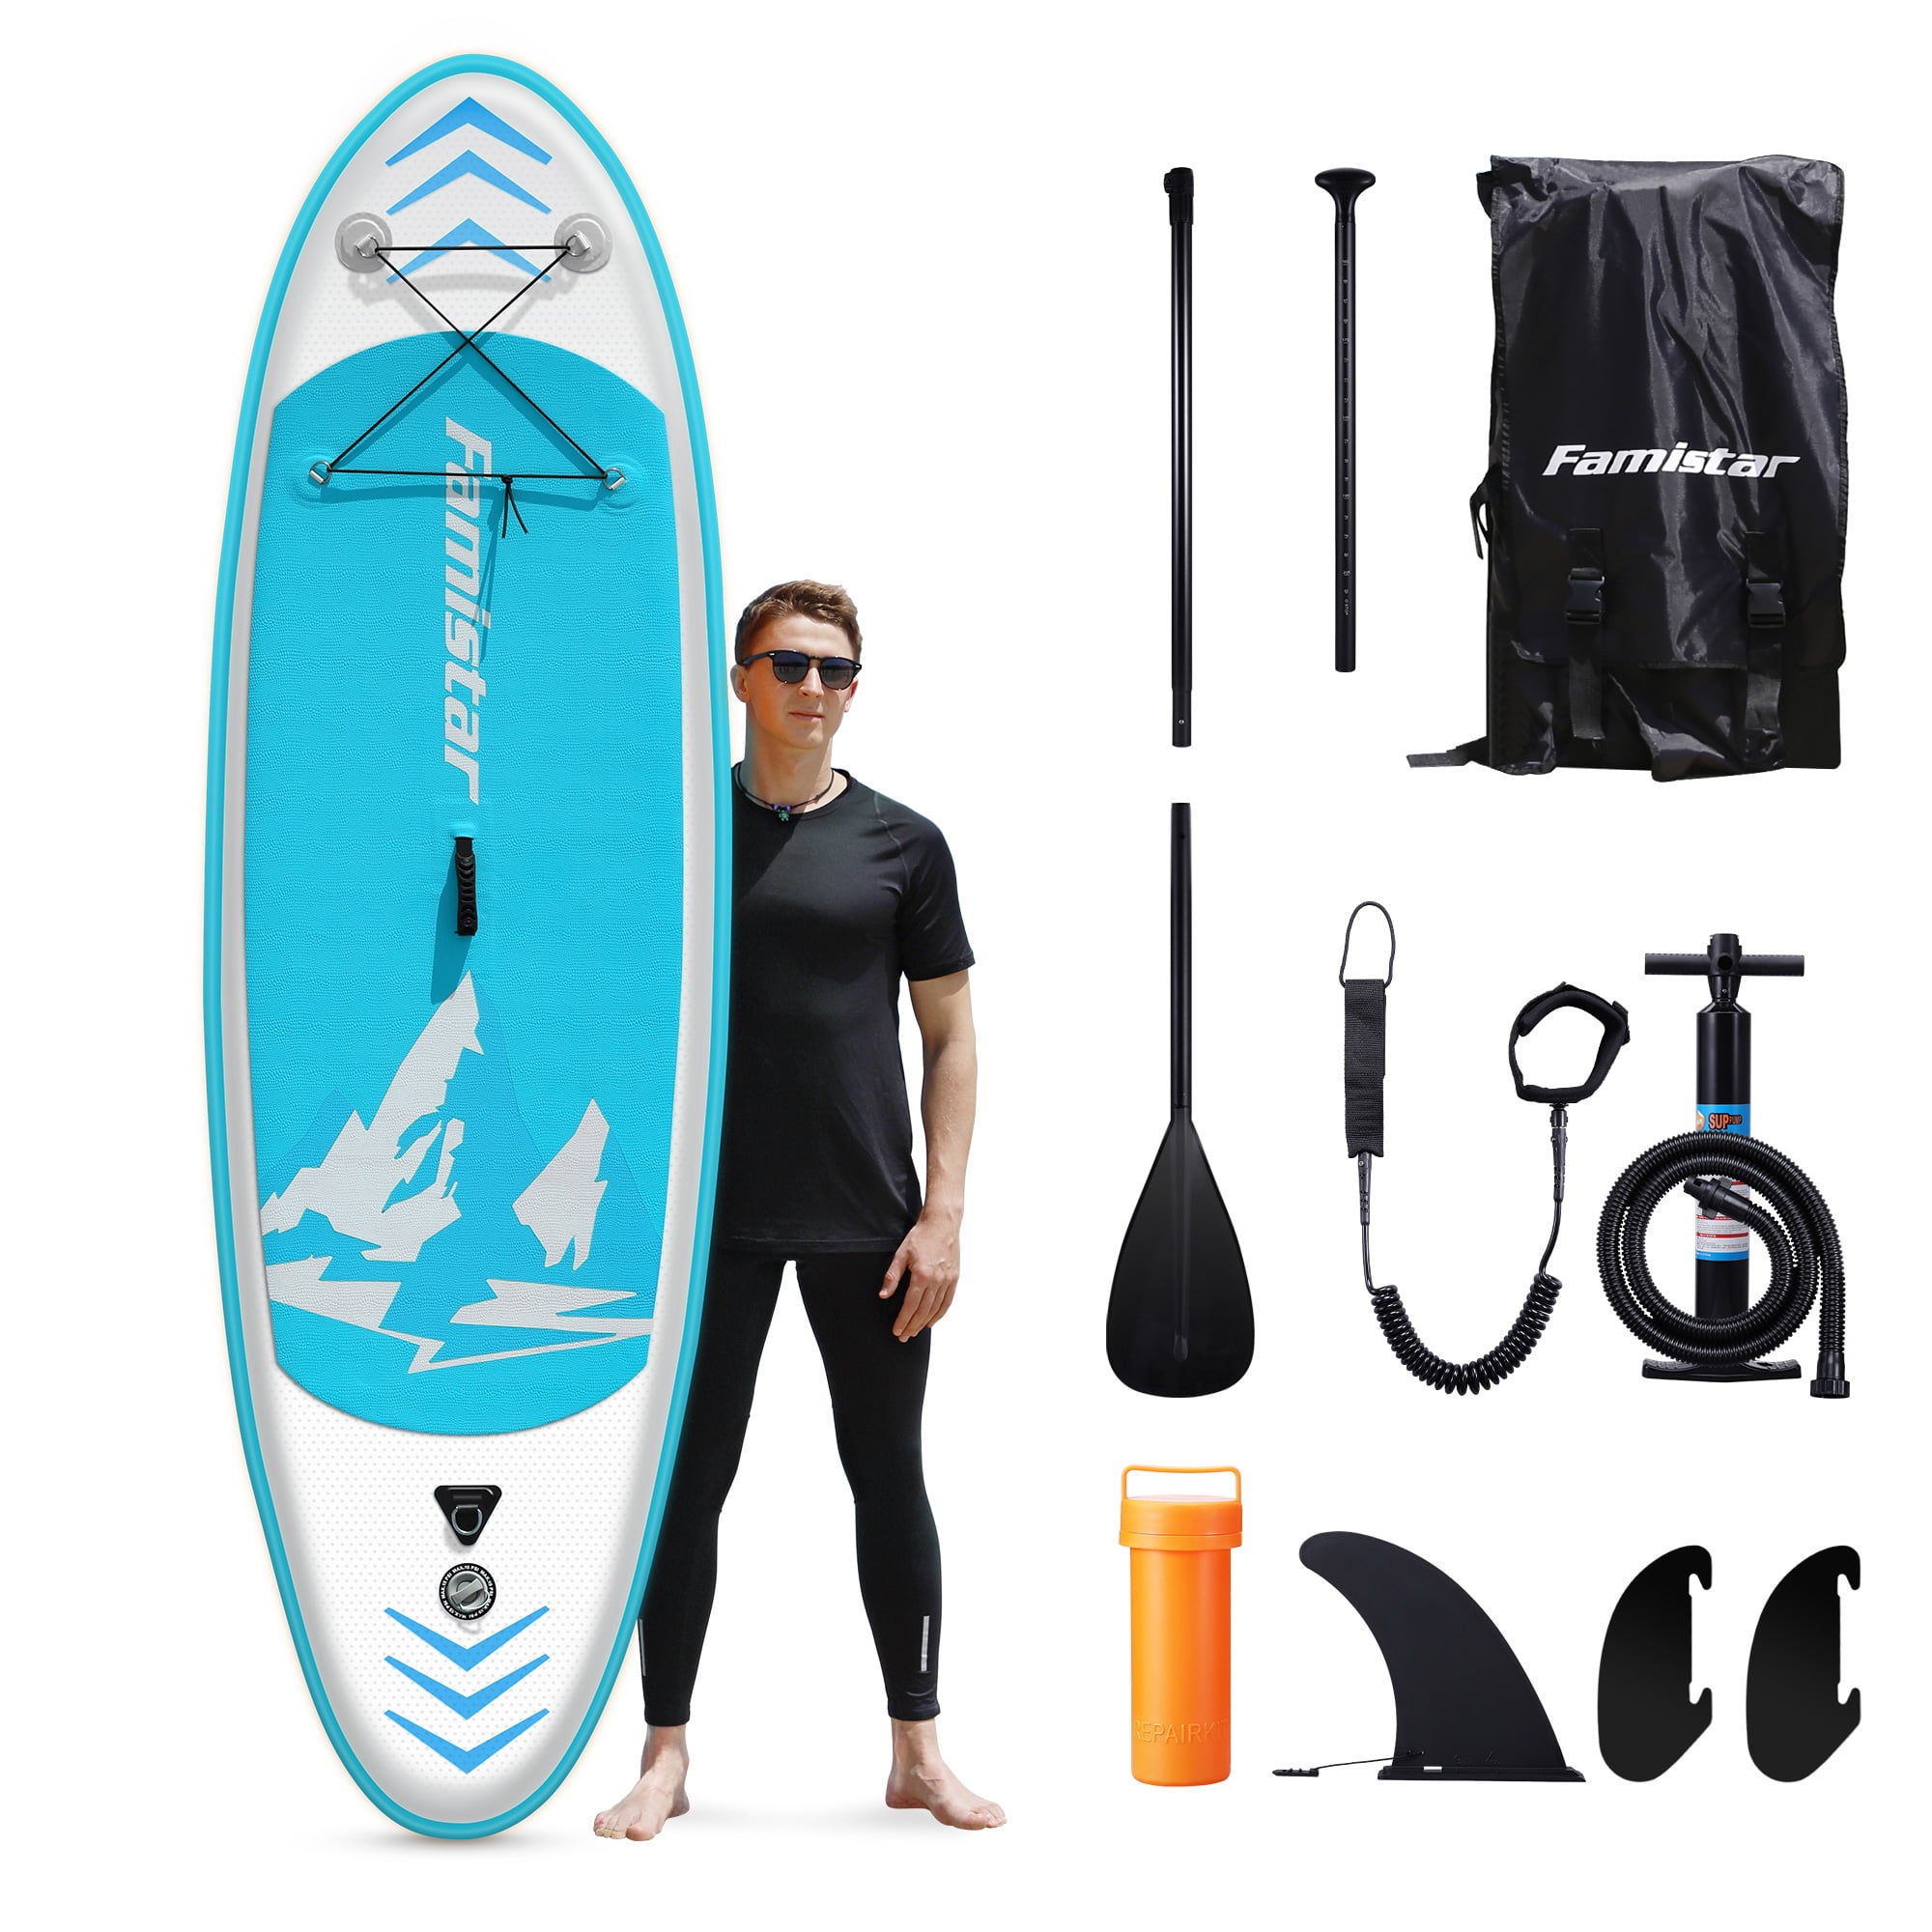 Famistar 8 Ft. 7 In. Inflatable Stand Up Paddle Board SUP with 3 Fins, Adjustable Paddle, Pump & Carrying Backpack